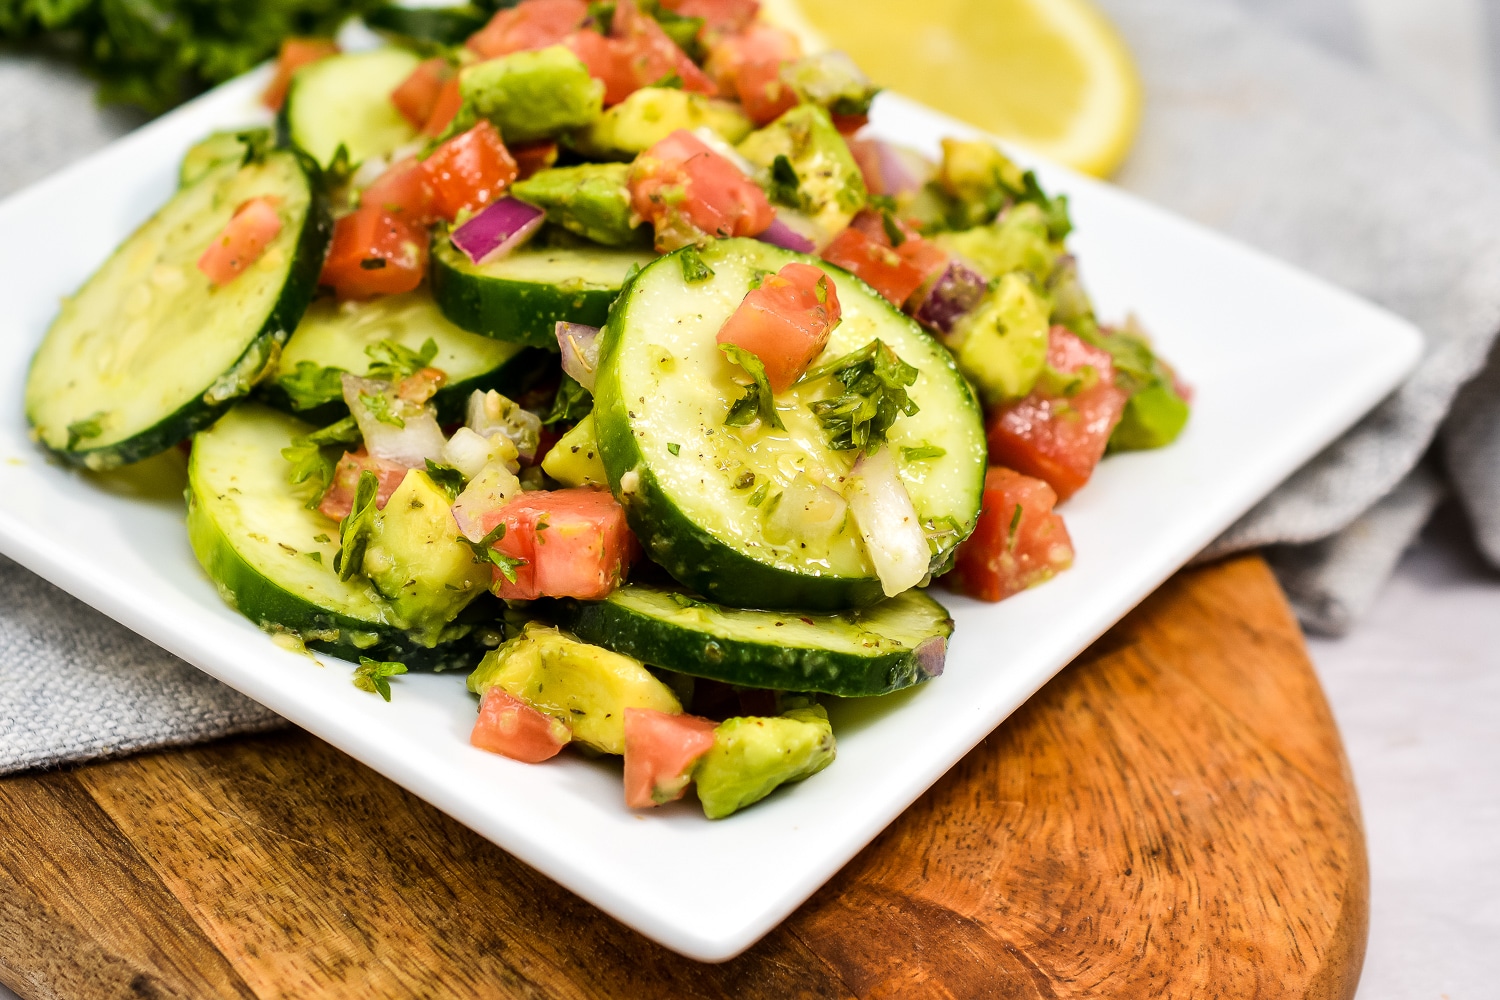 tomato salad with cucumber and avocado